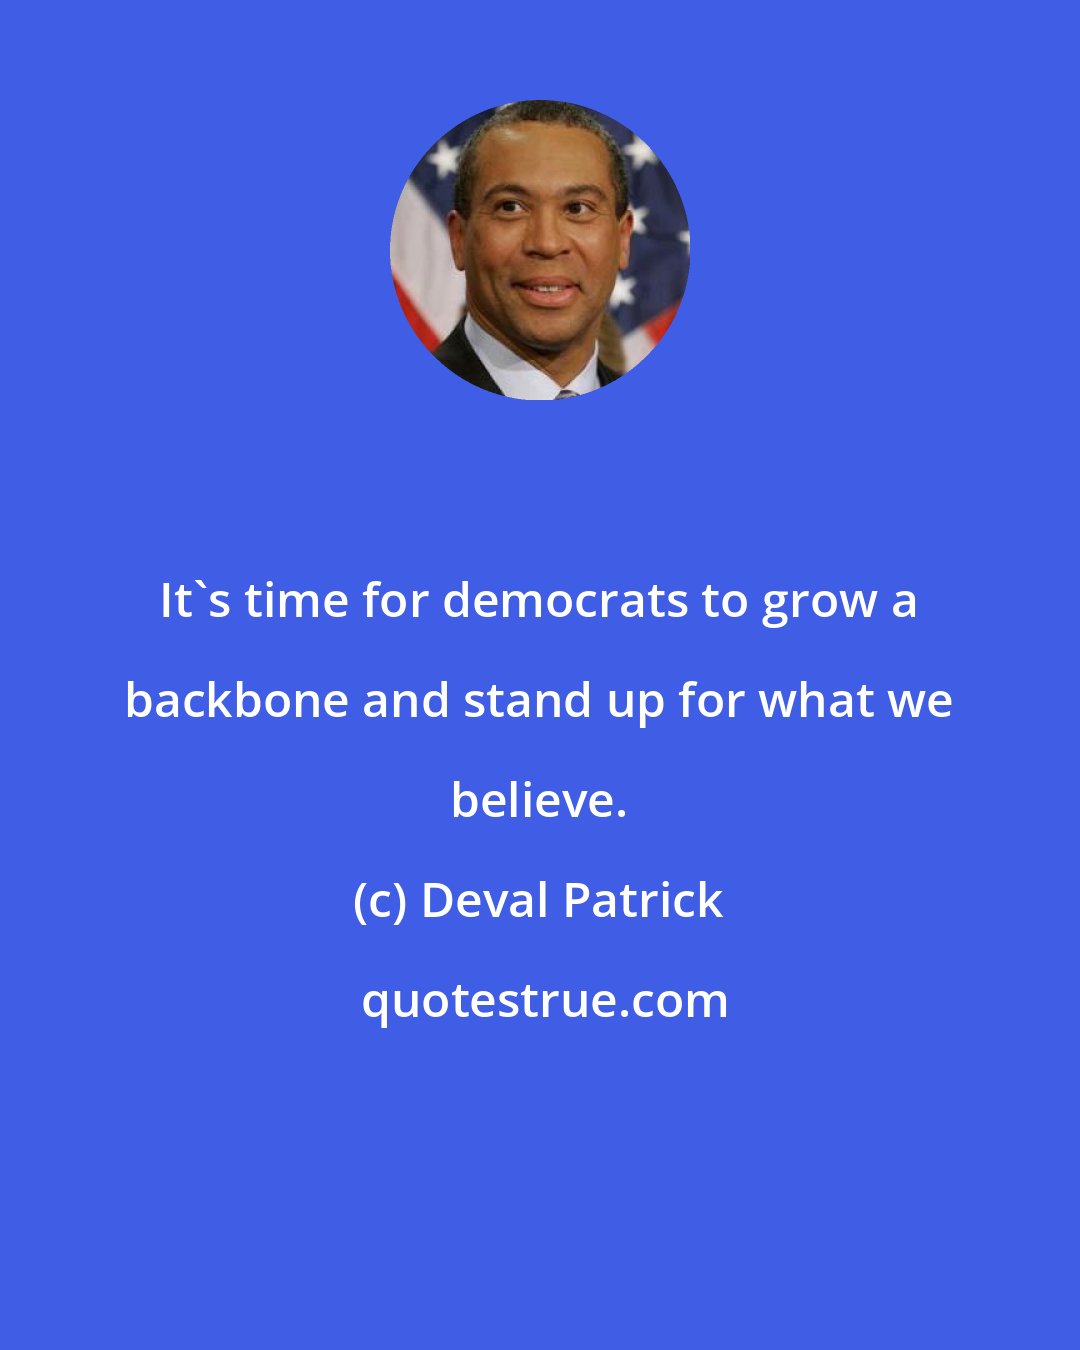 Deval Patrick: It's time for democrats to grow a backbone and stand up for what we believe.